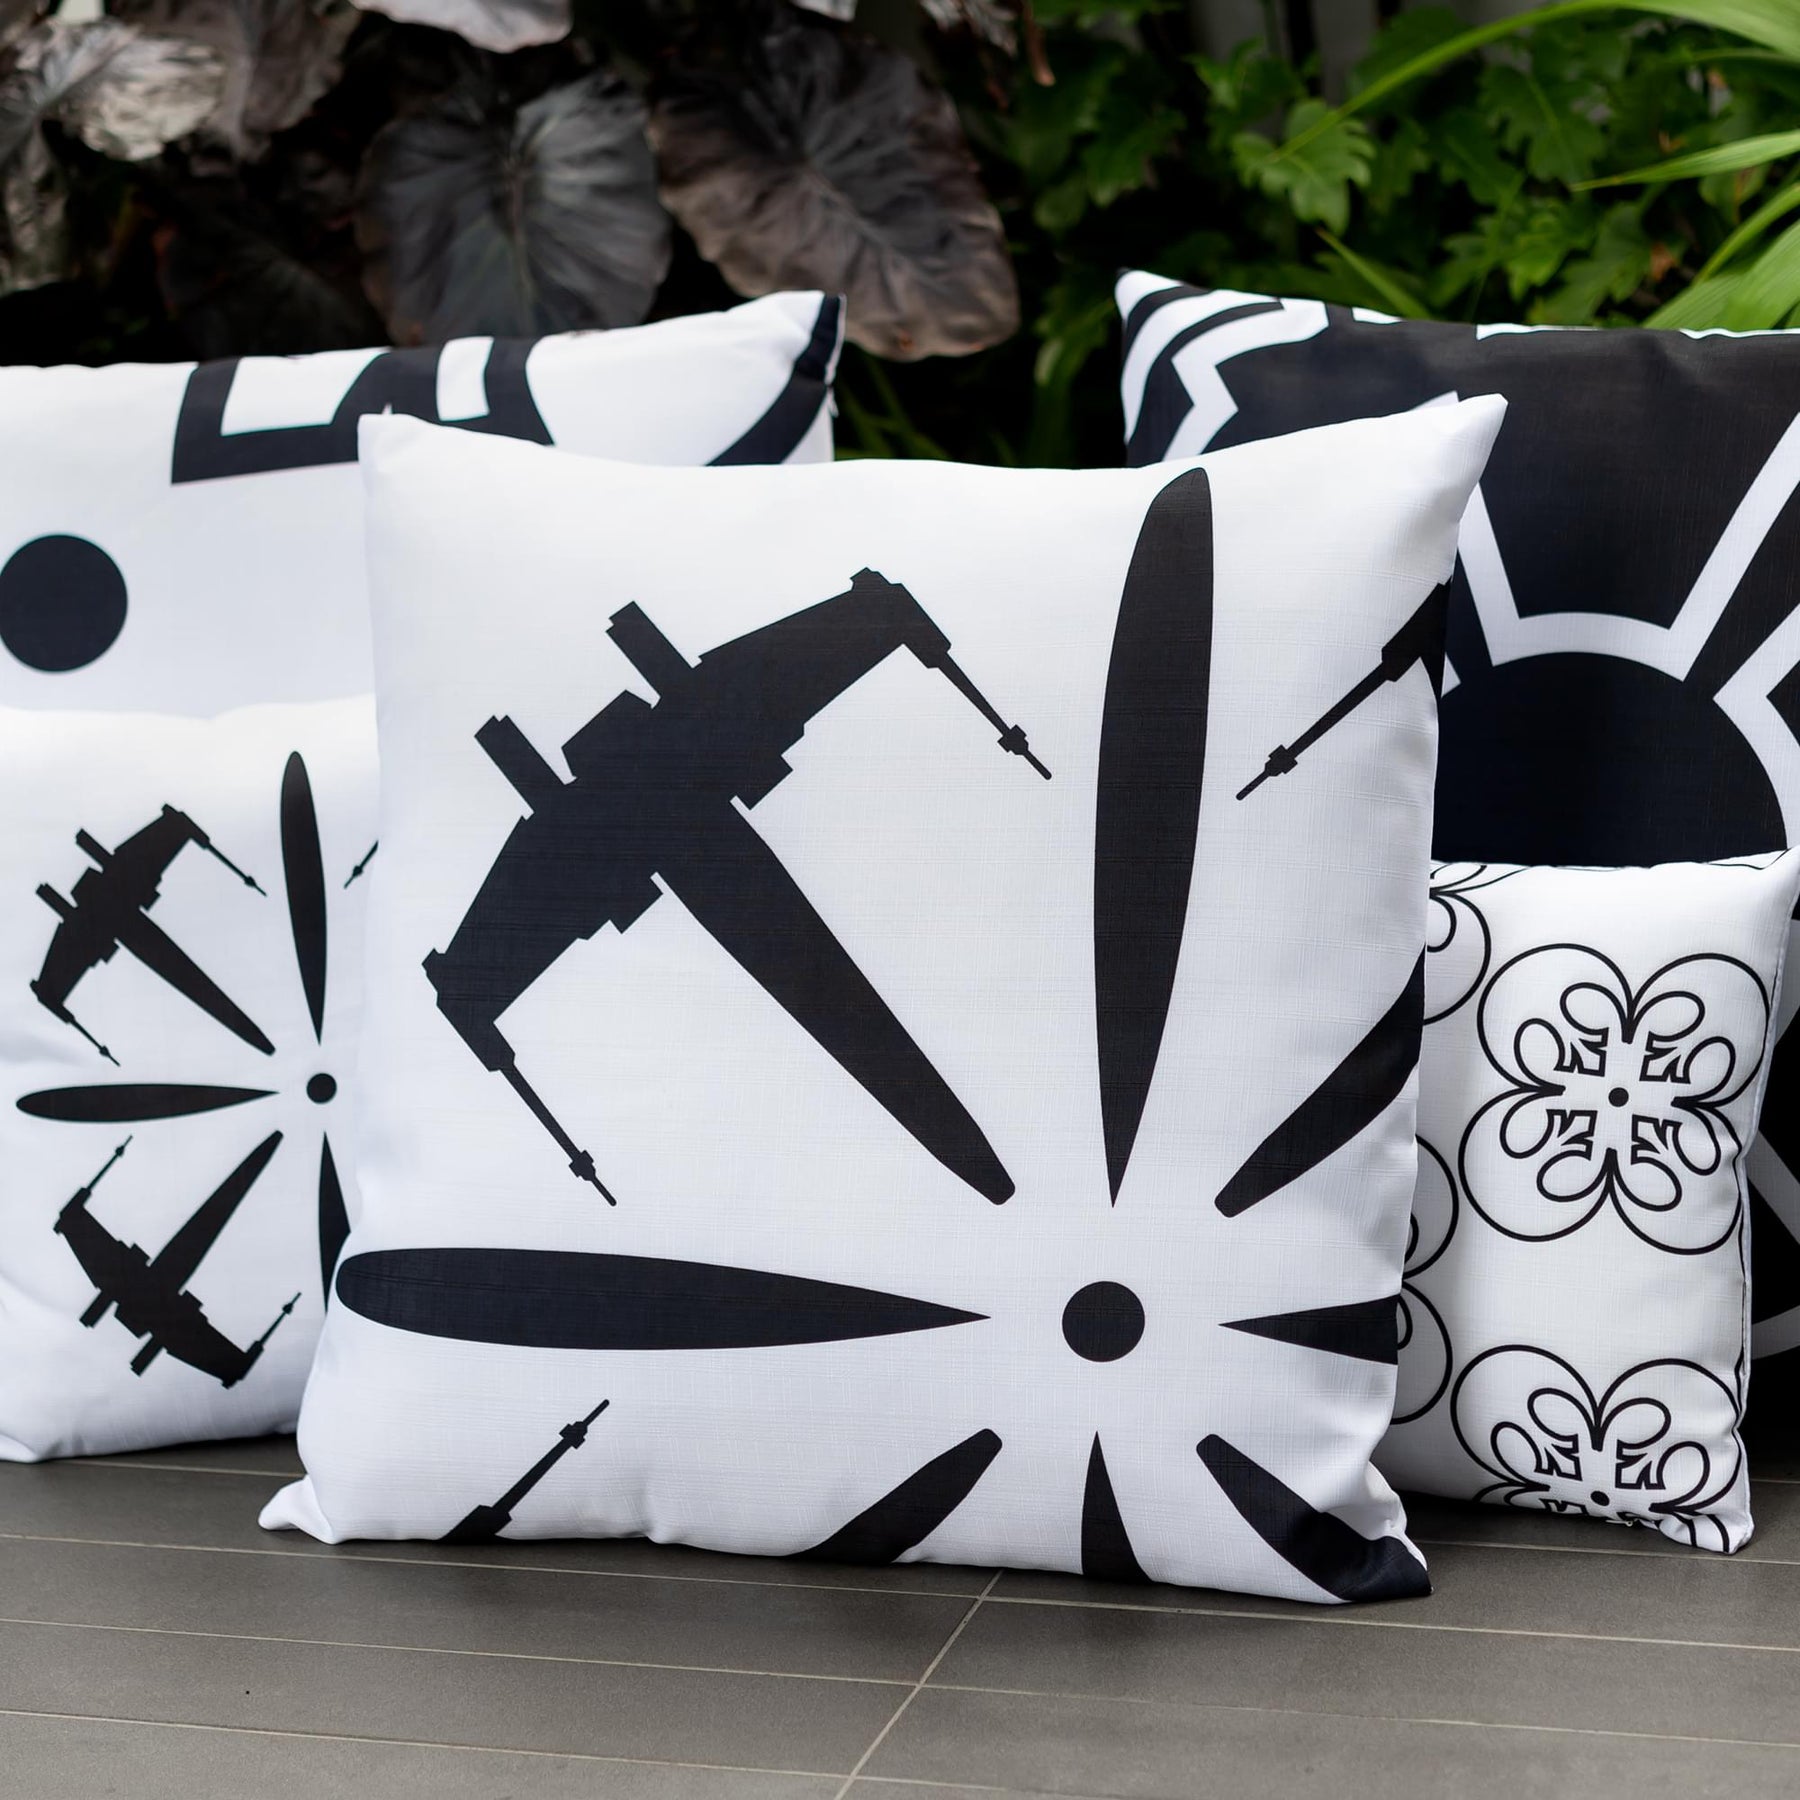 Star Wars White Throw Pillow | Black X-Wing Fighter Design | 25 x 25 Inches